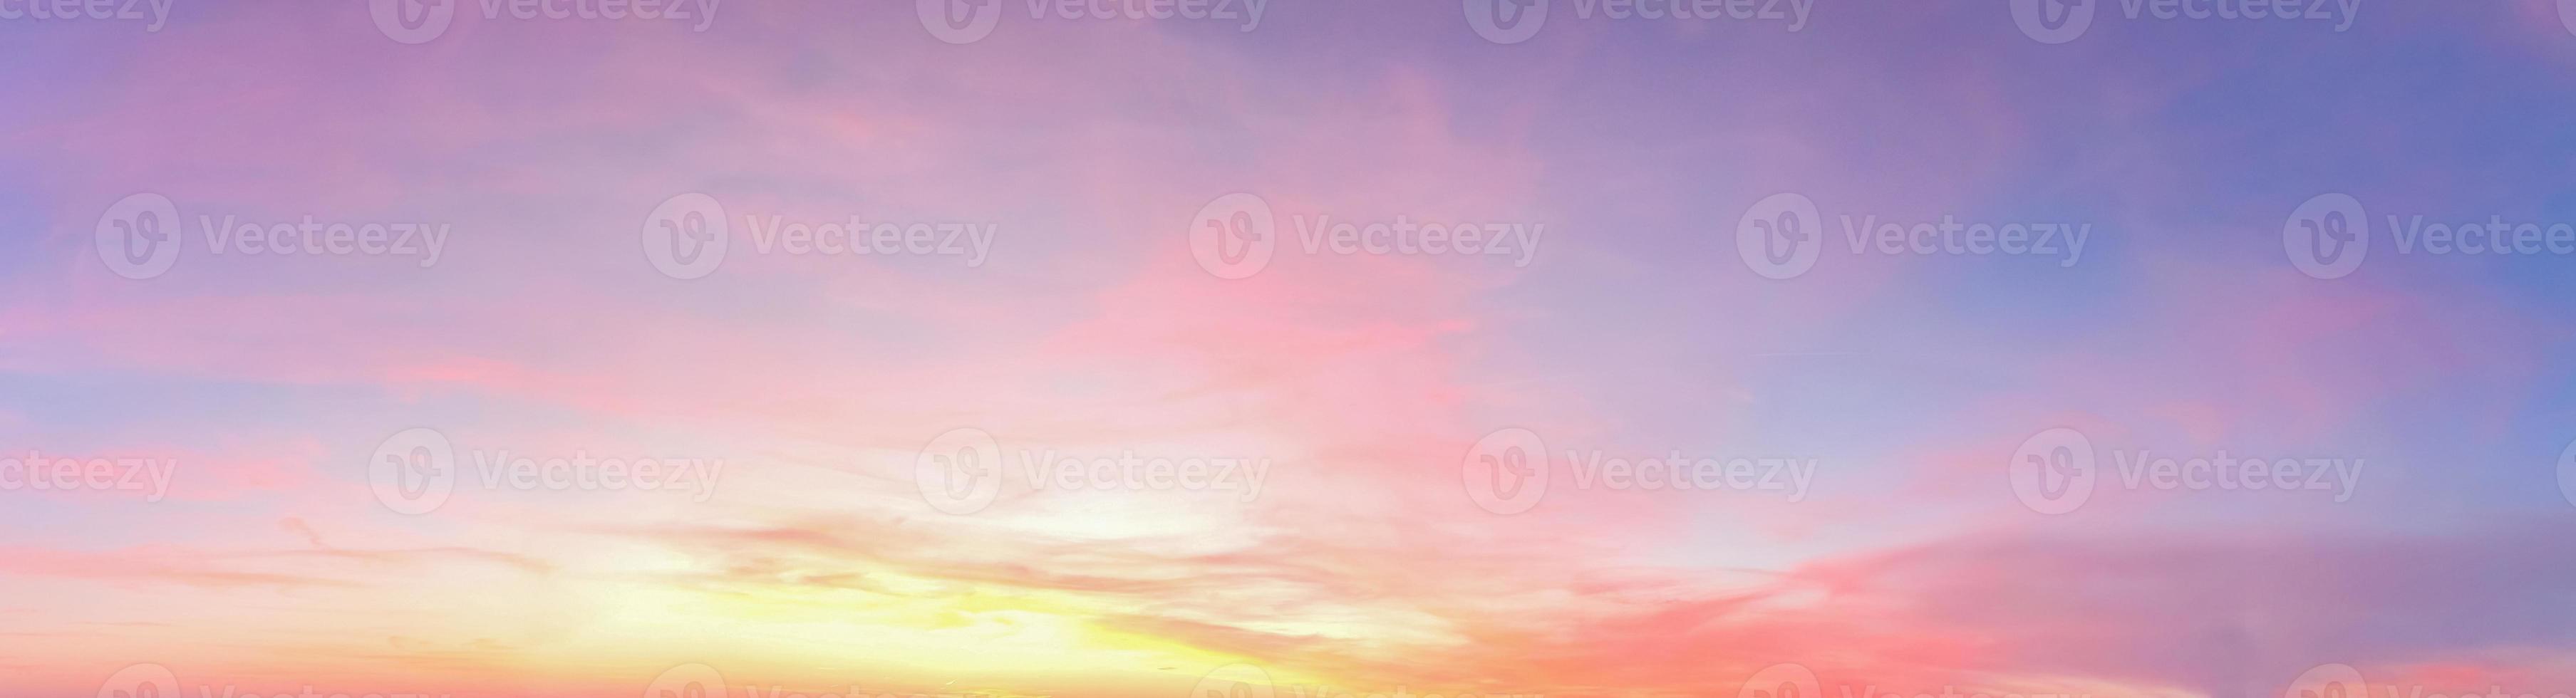 Beautiful high resolution panorama of orange and red sunset clouds in the evening sky photo